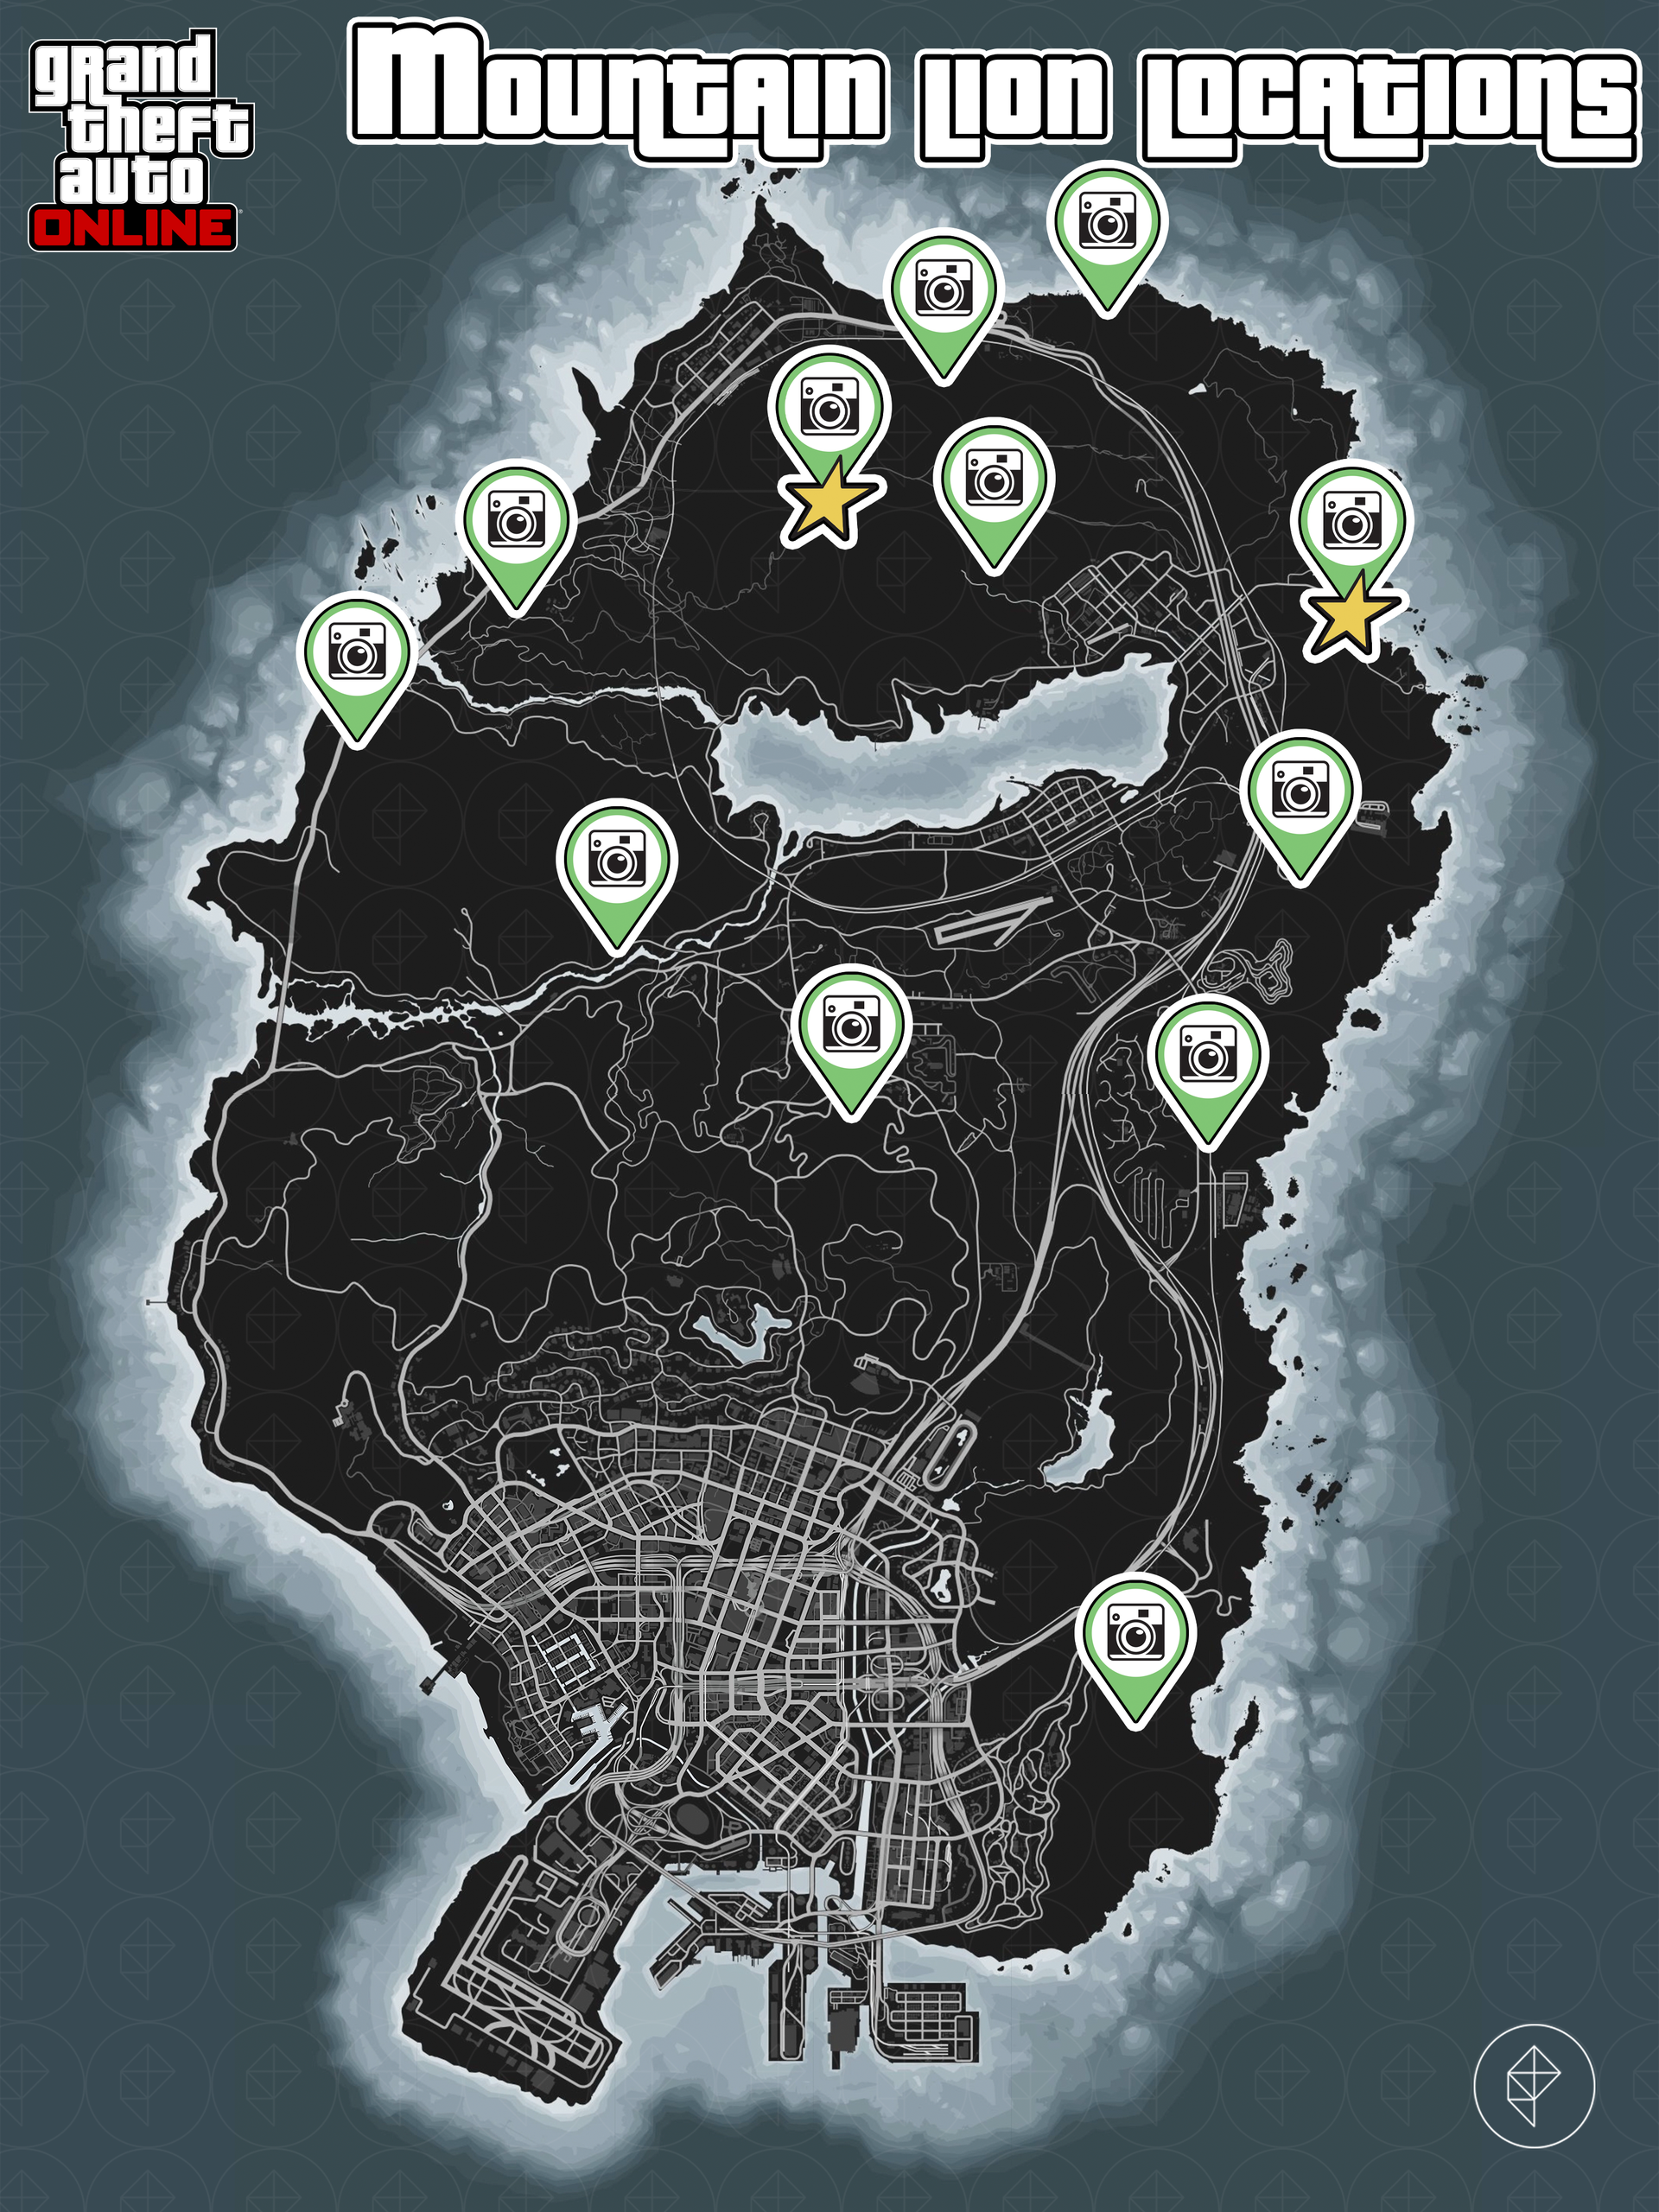 GTA Online map showing mountain lion locations